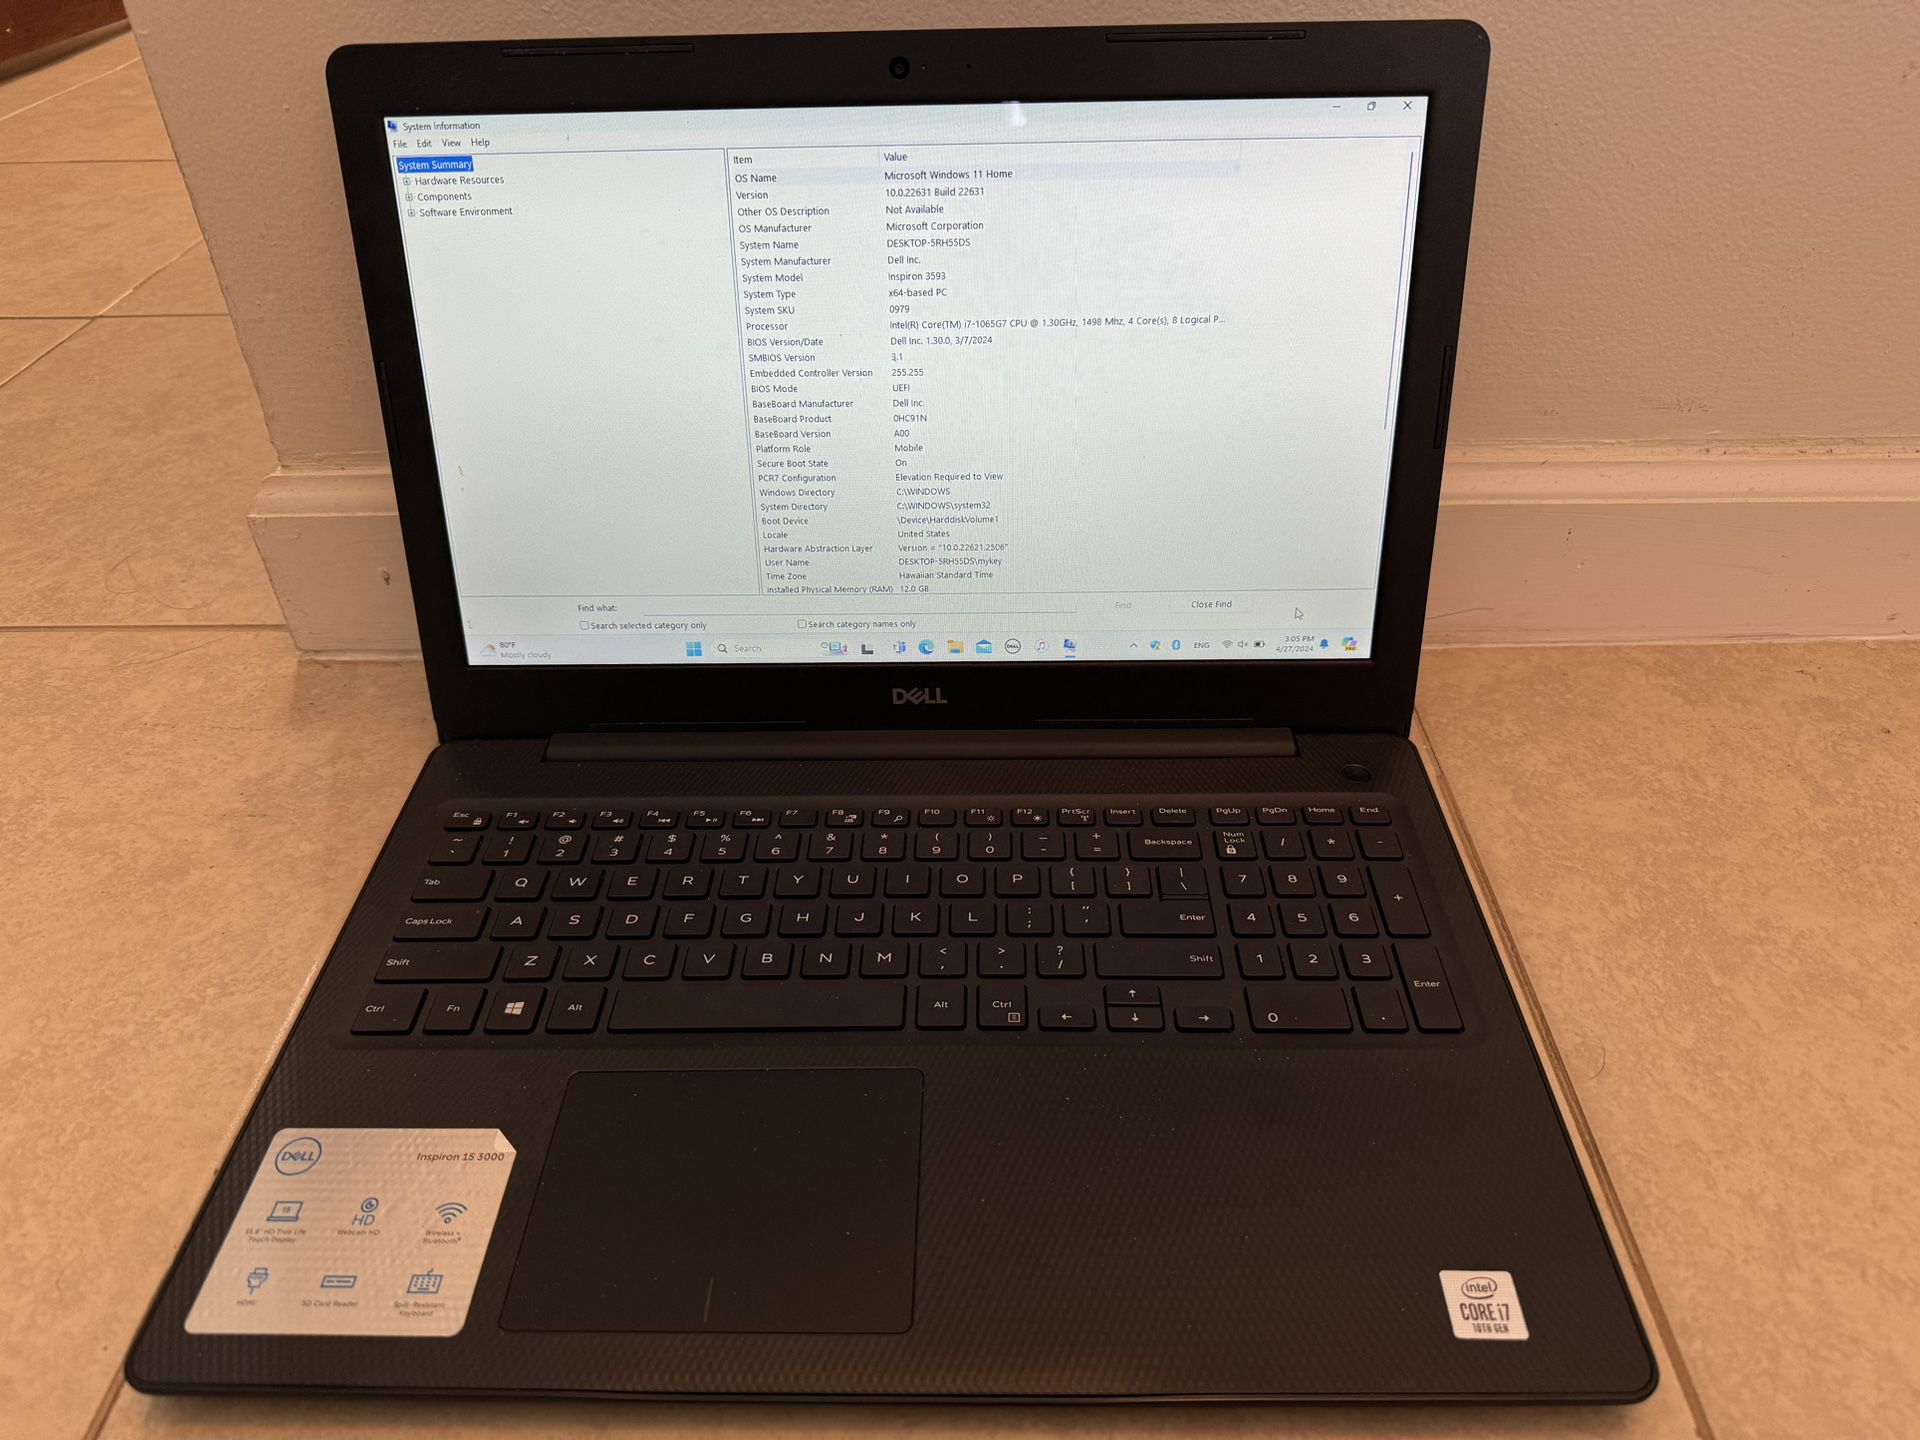 Dell Inspiron 15 3593 Intel i7 12GB Memory 512GB SSD Touch display